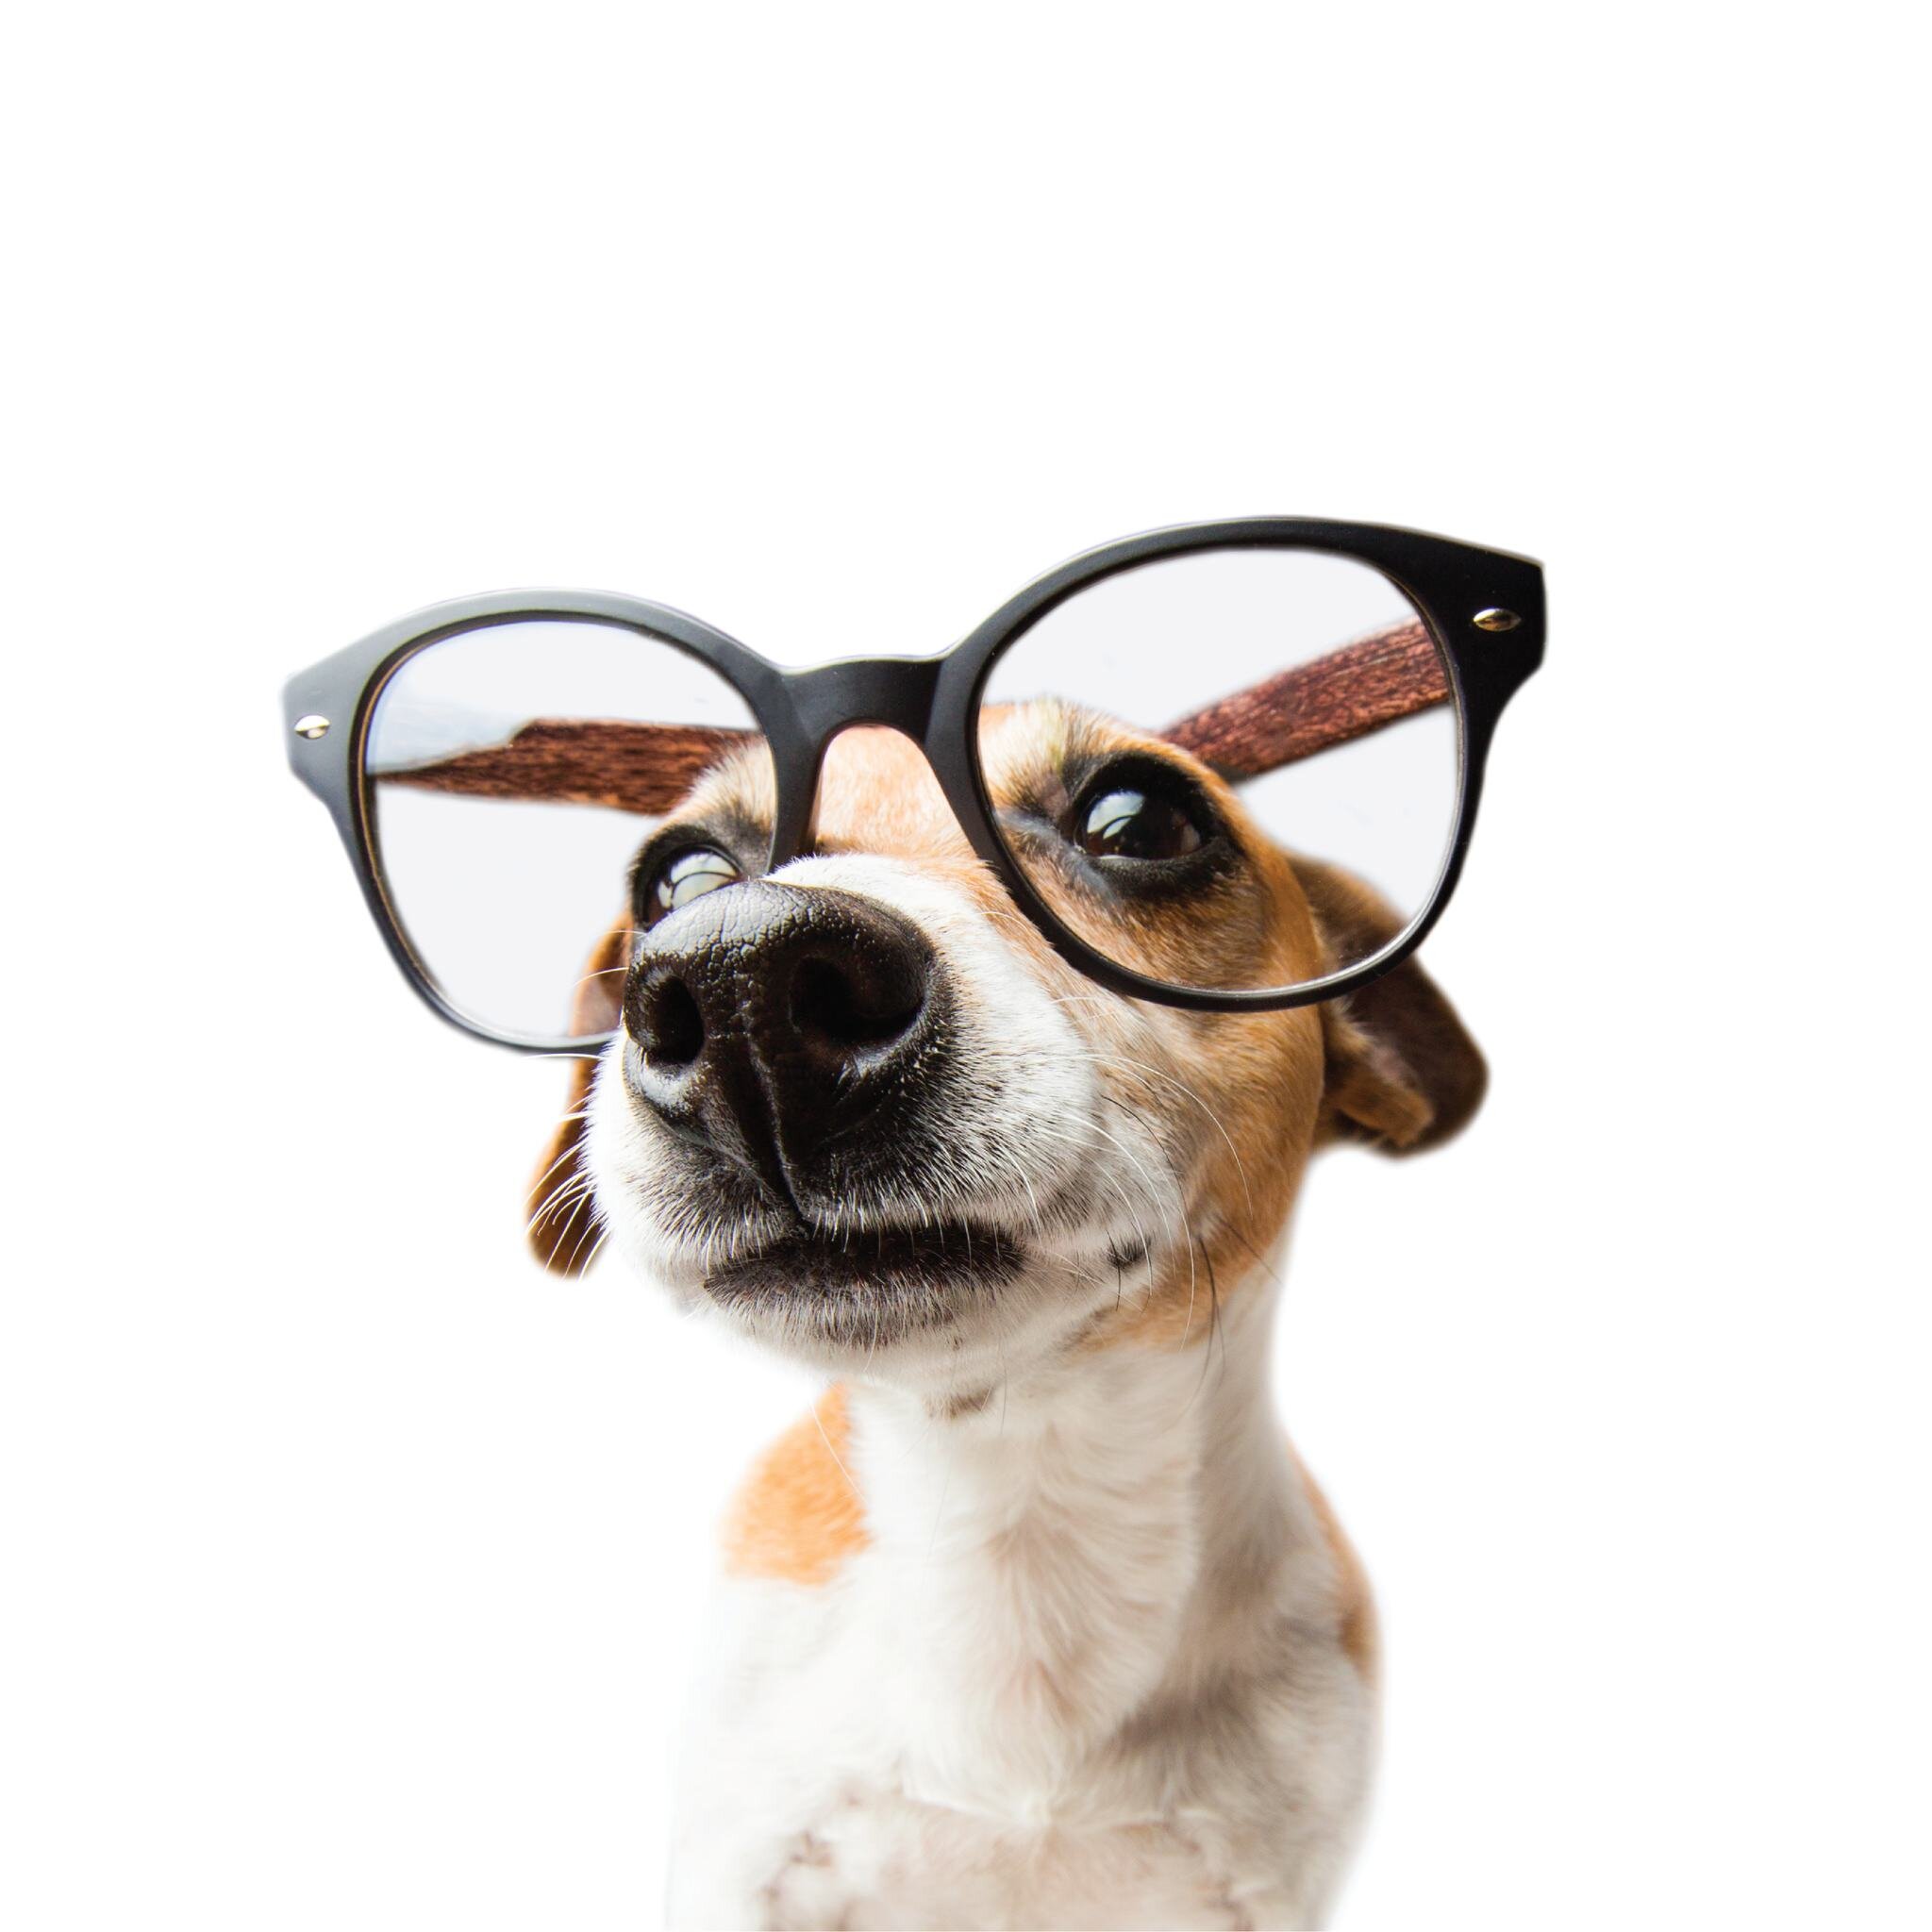 Furry friends deserve clear vision, too 🐾 Now serving pets! Wondering if your dog can see 20/20? Our pet eyewear could make all the difference. Don't wait&mdash;schedule an appointment today, and let's help your pup see the world in a whole new way!